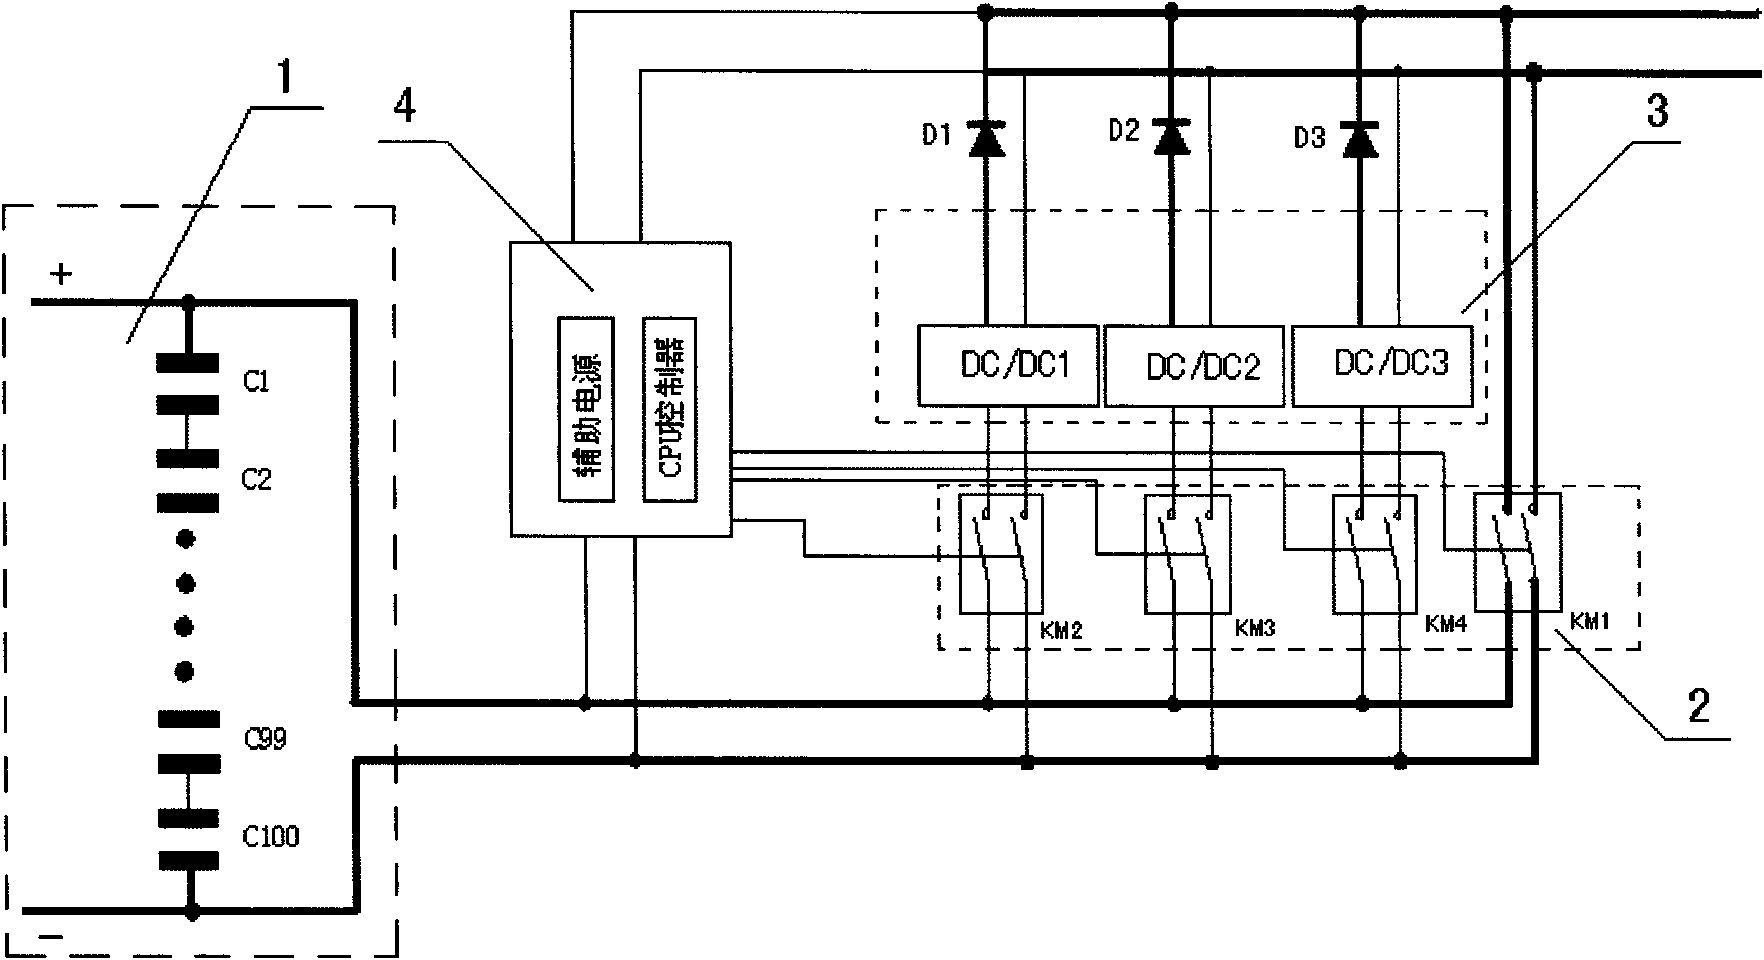 Multi-level direct current transformation power supply device